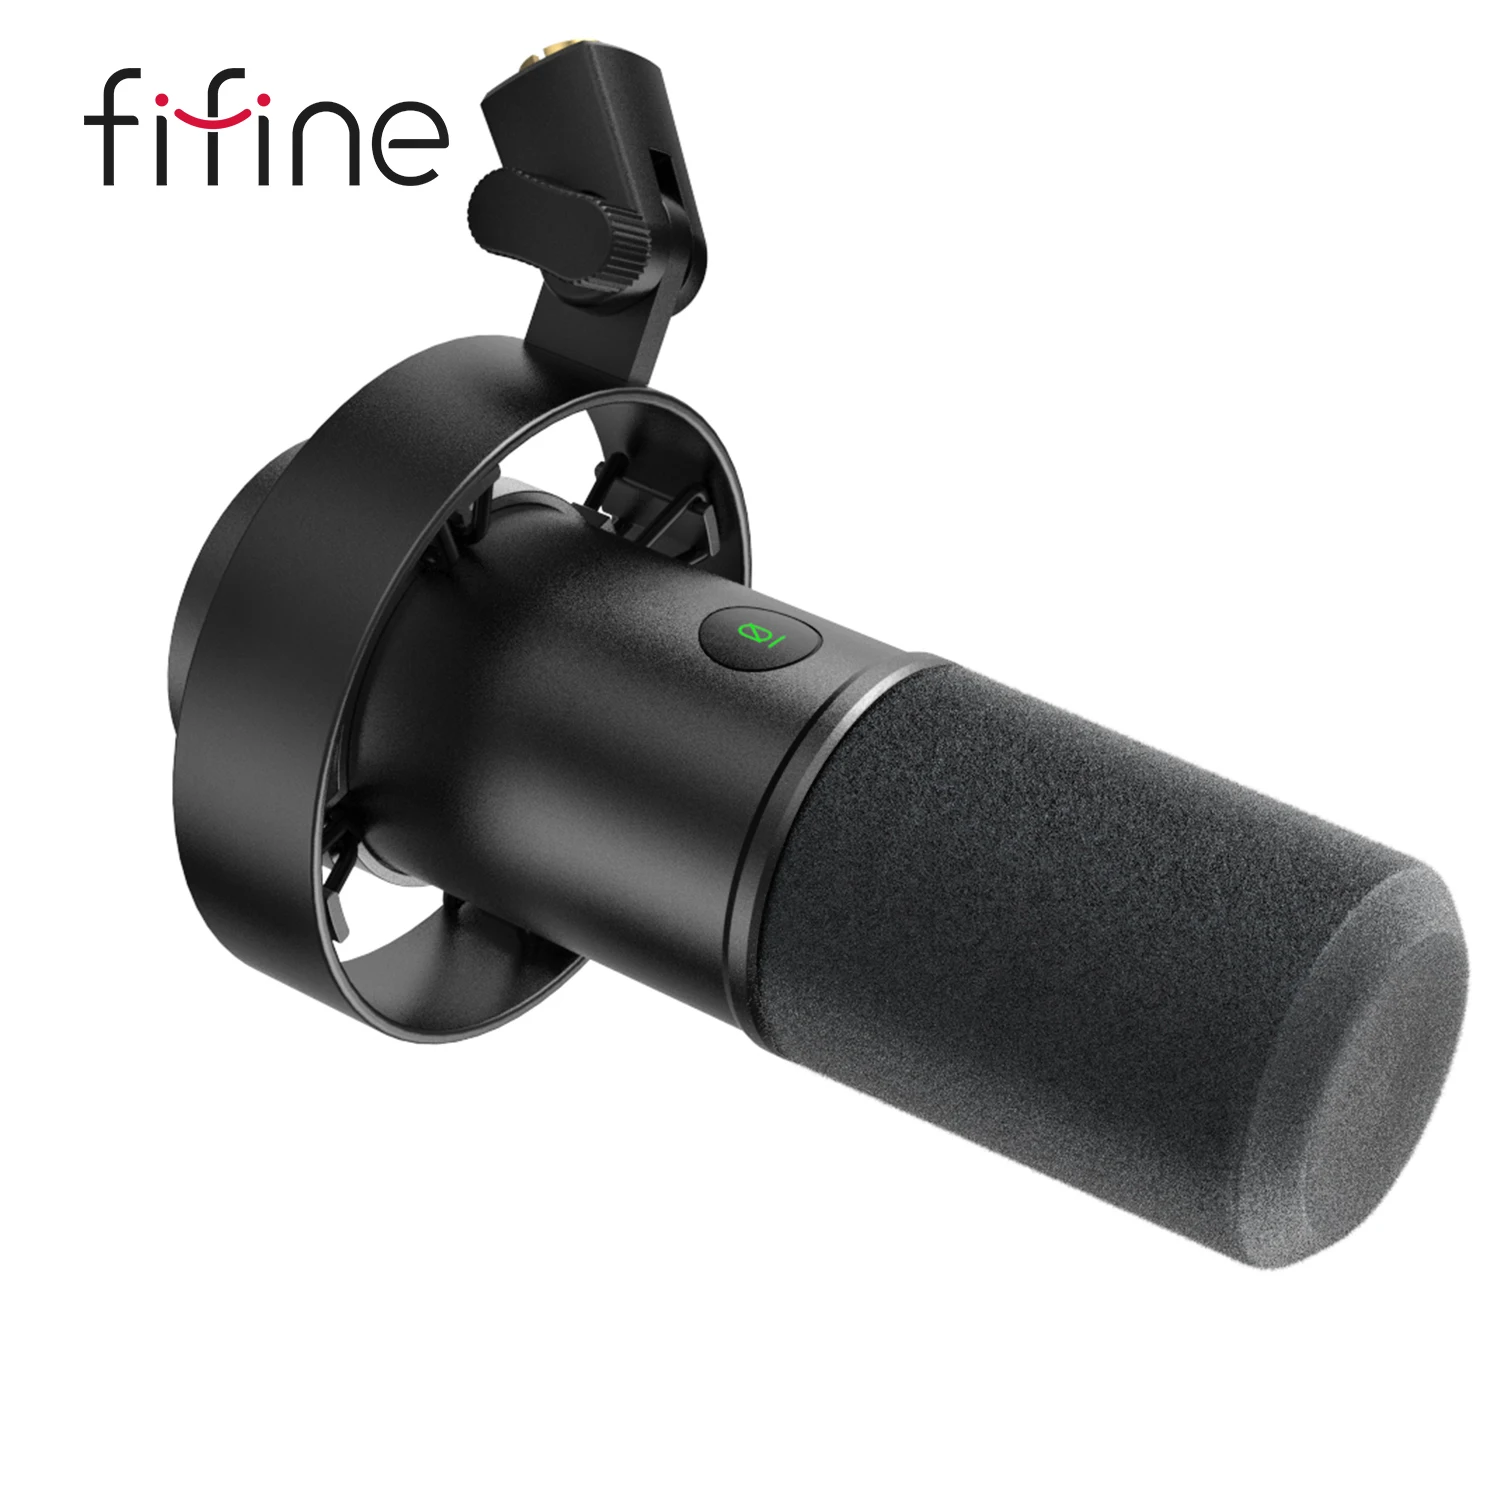 fifine k688 professional recording microphone streaming